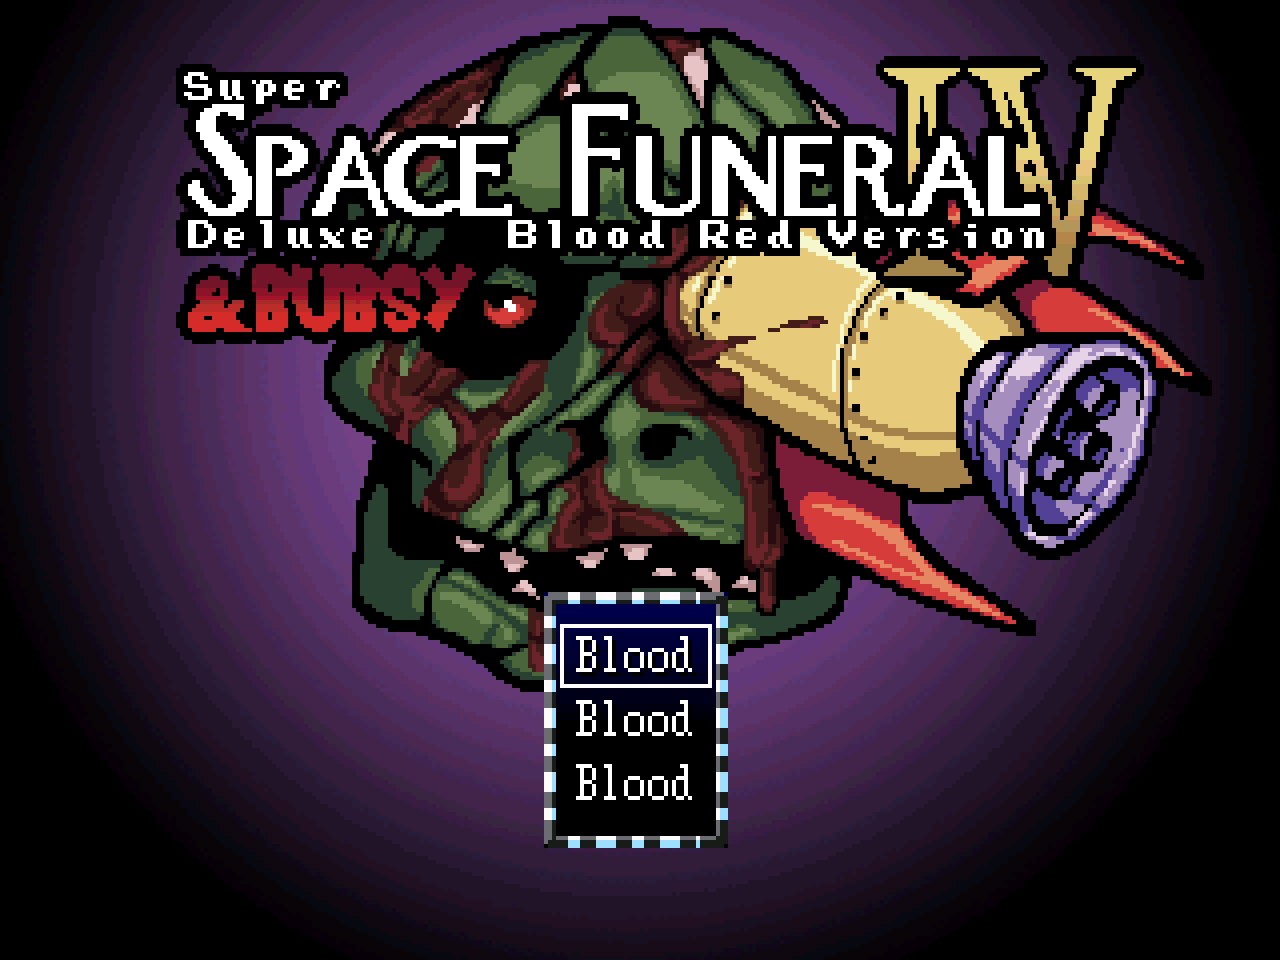 super space funeral 4 deluxe blood red version and bubsy